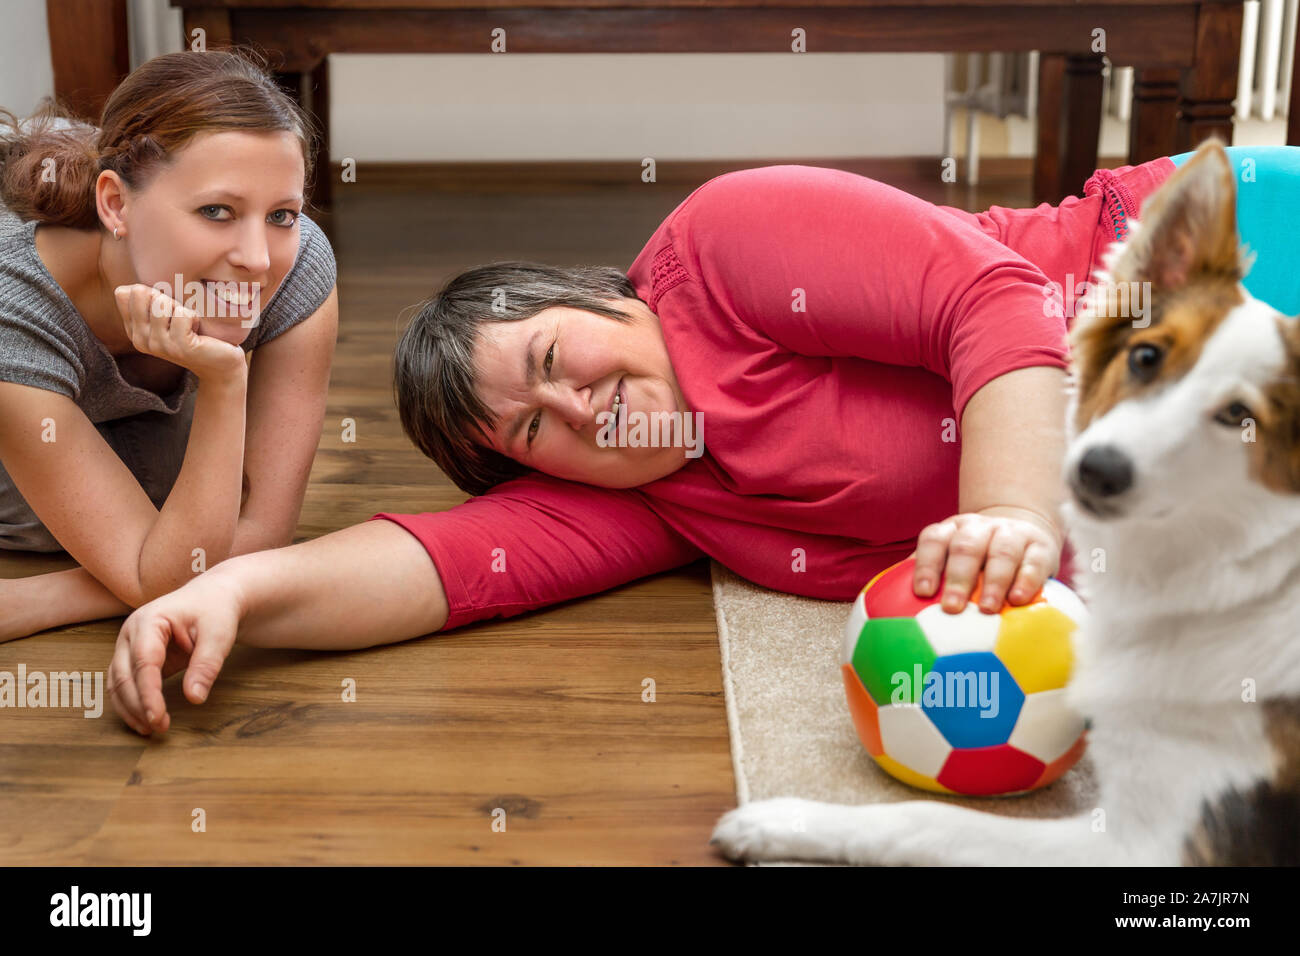 mentally disabled woman is laying on the floor, playing with a trained care dog Stock Photo